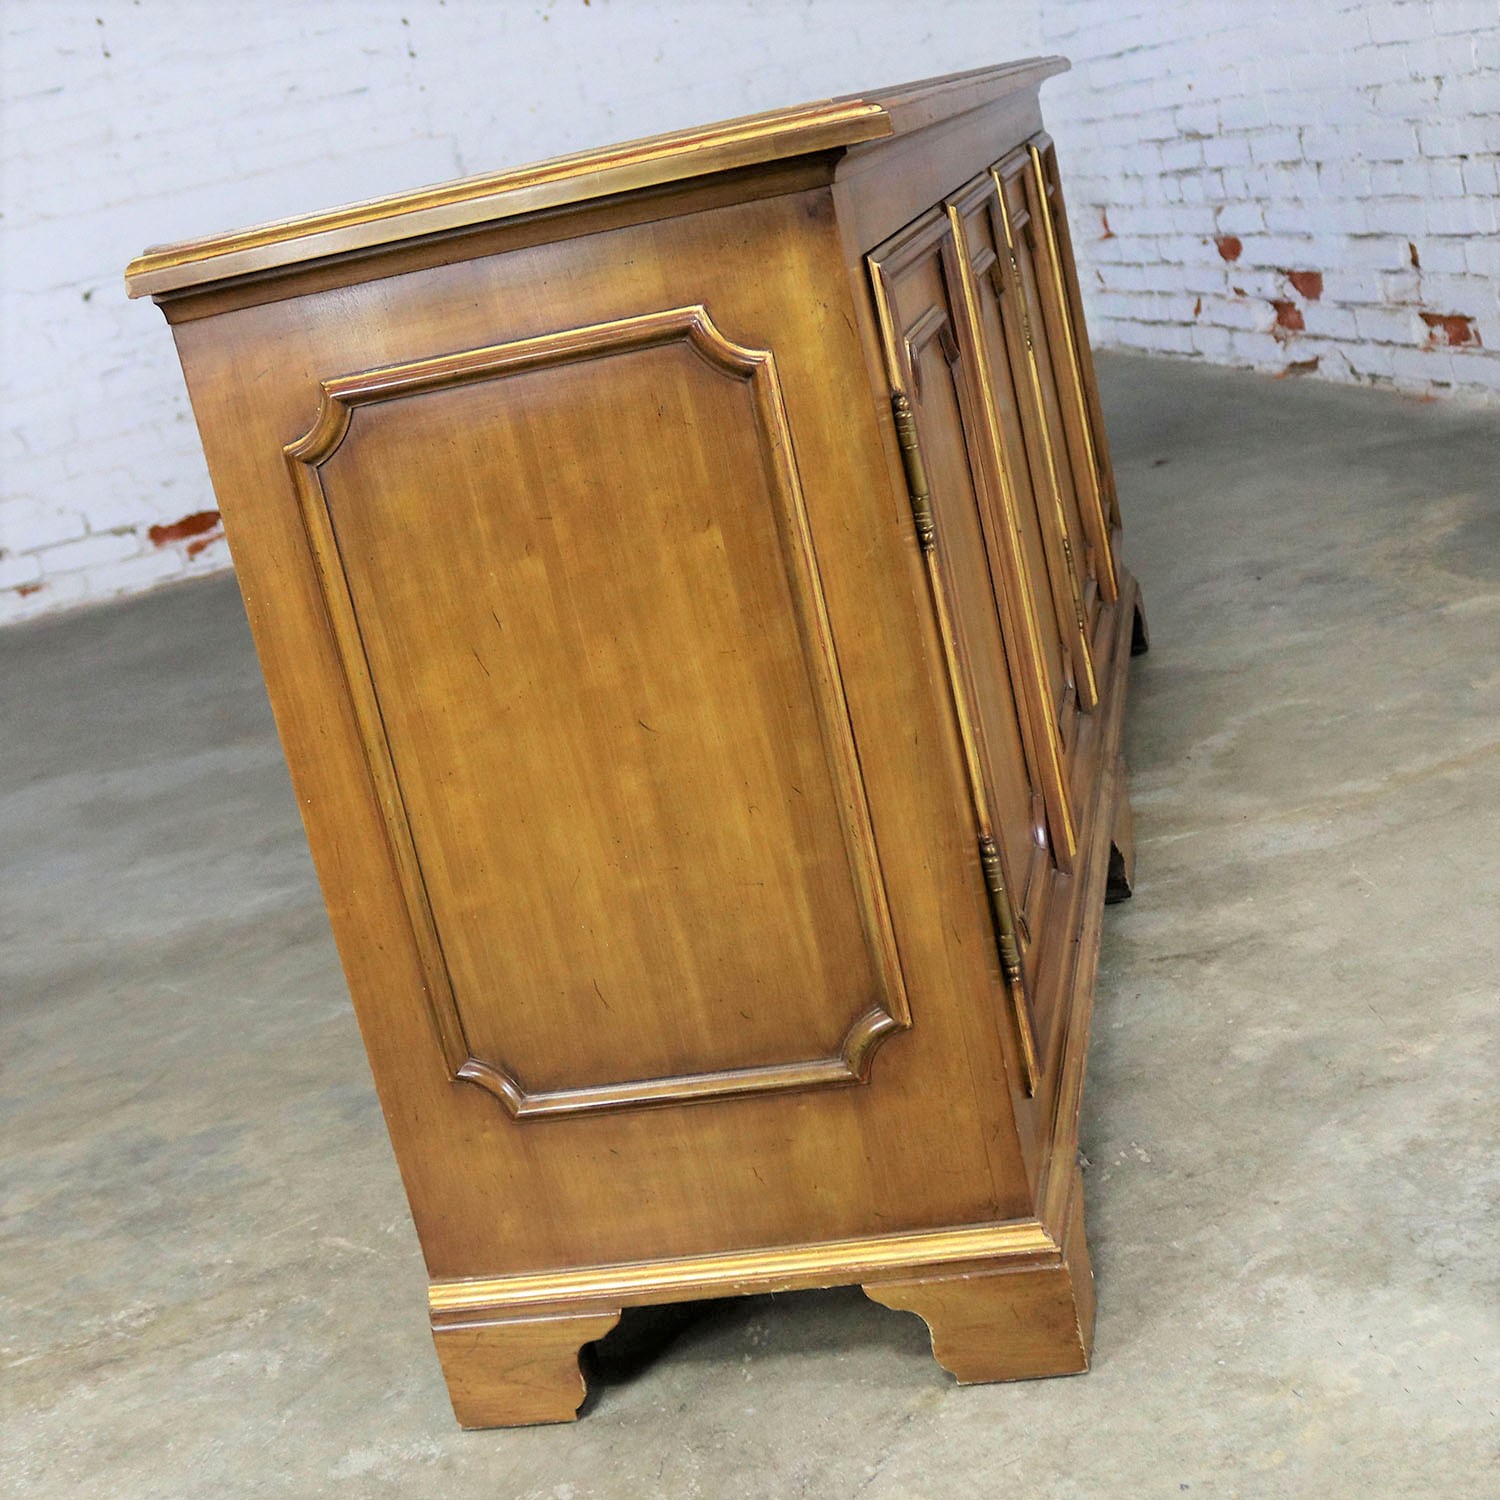 John Widdicomb Painted Hollywood Regency Credenza with Gilt Accents